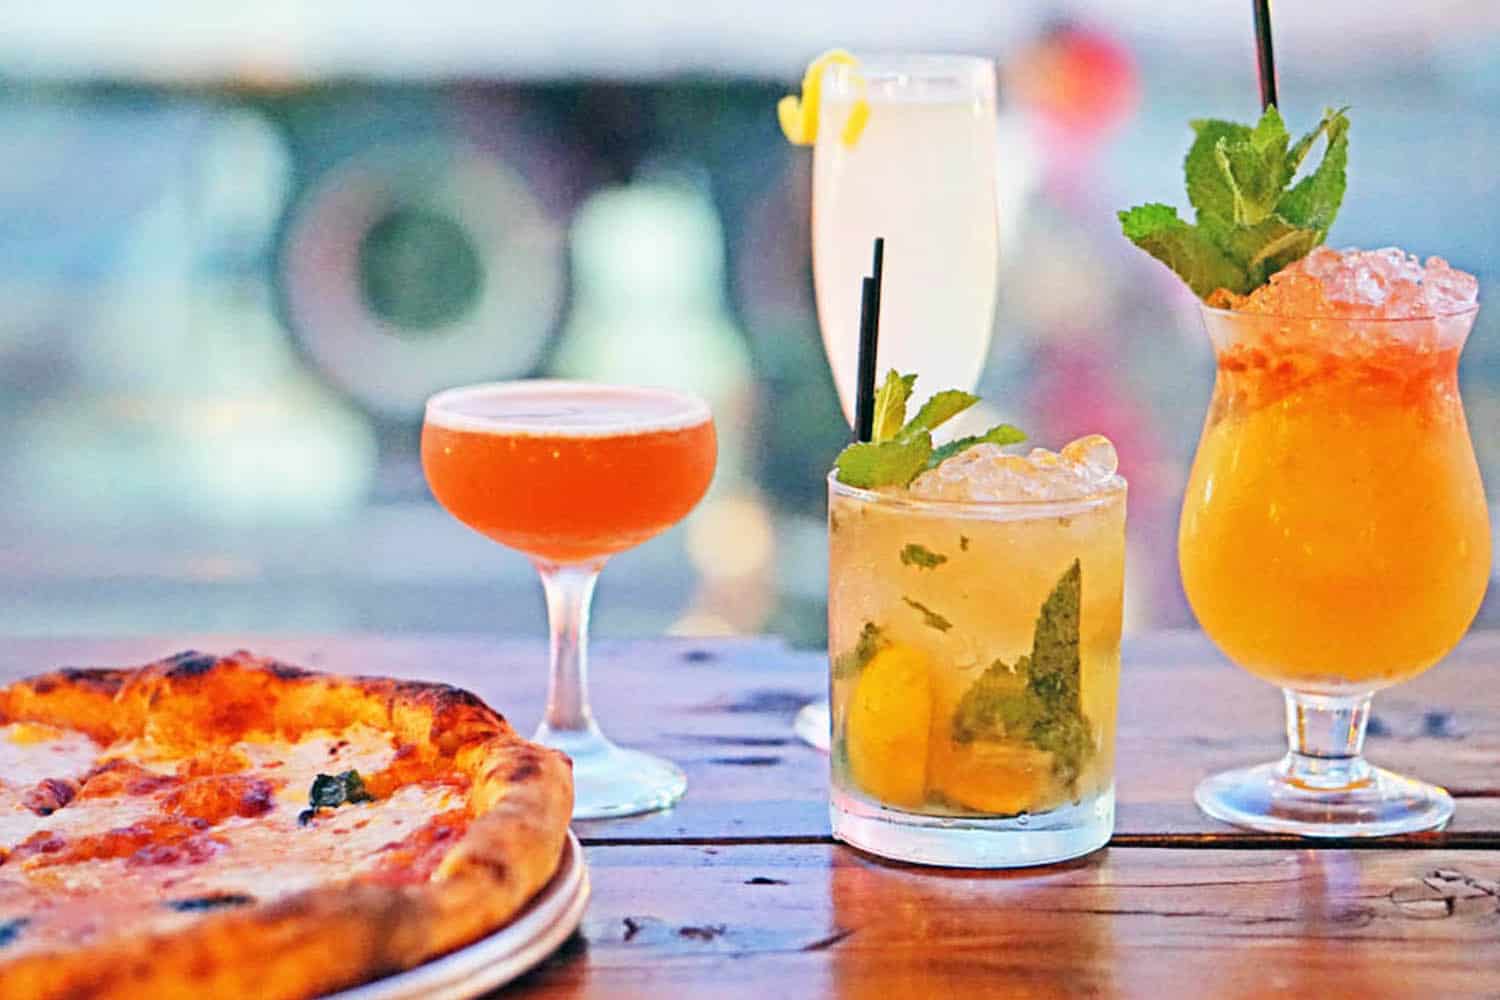 Wheater restauraunt pizza with cocktails